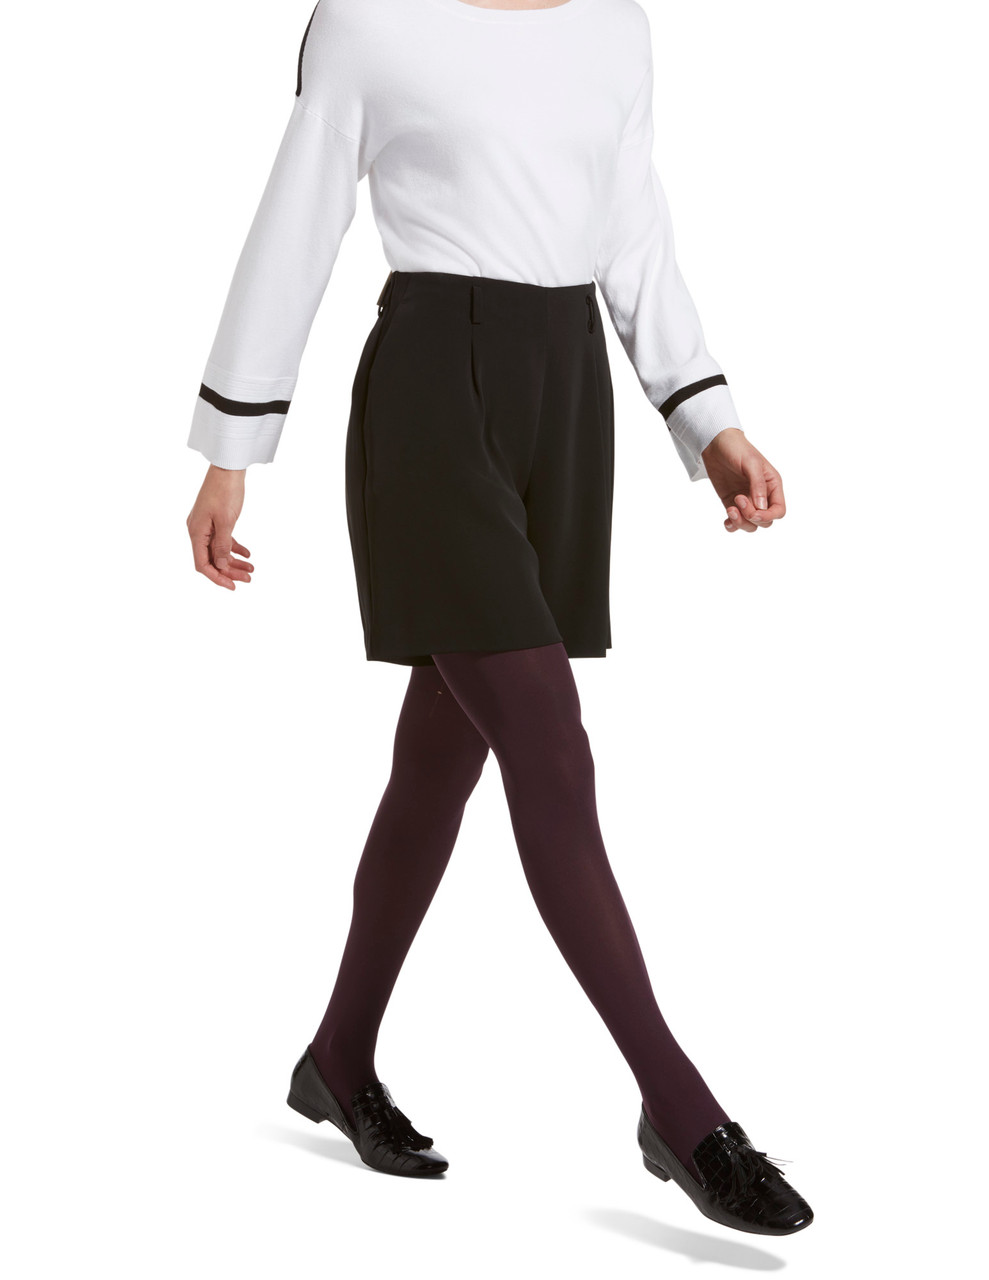 Tights Nuance 20 - Classic Matte Control Top buy in US, Canada